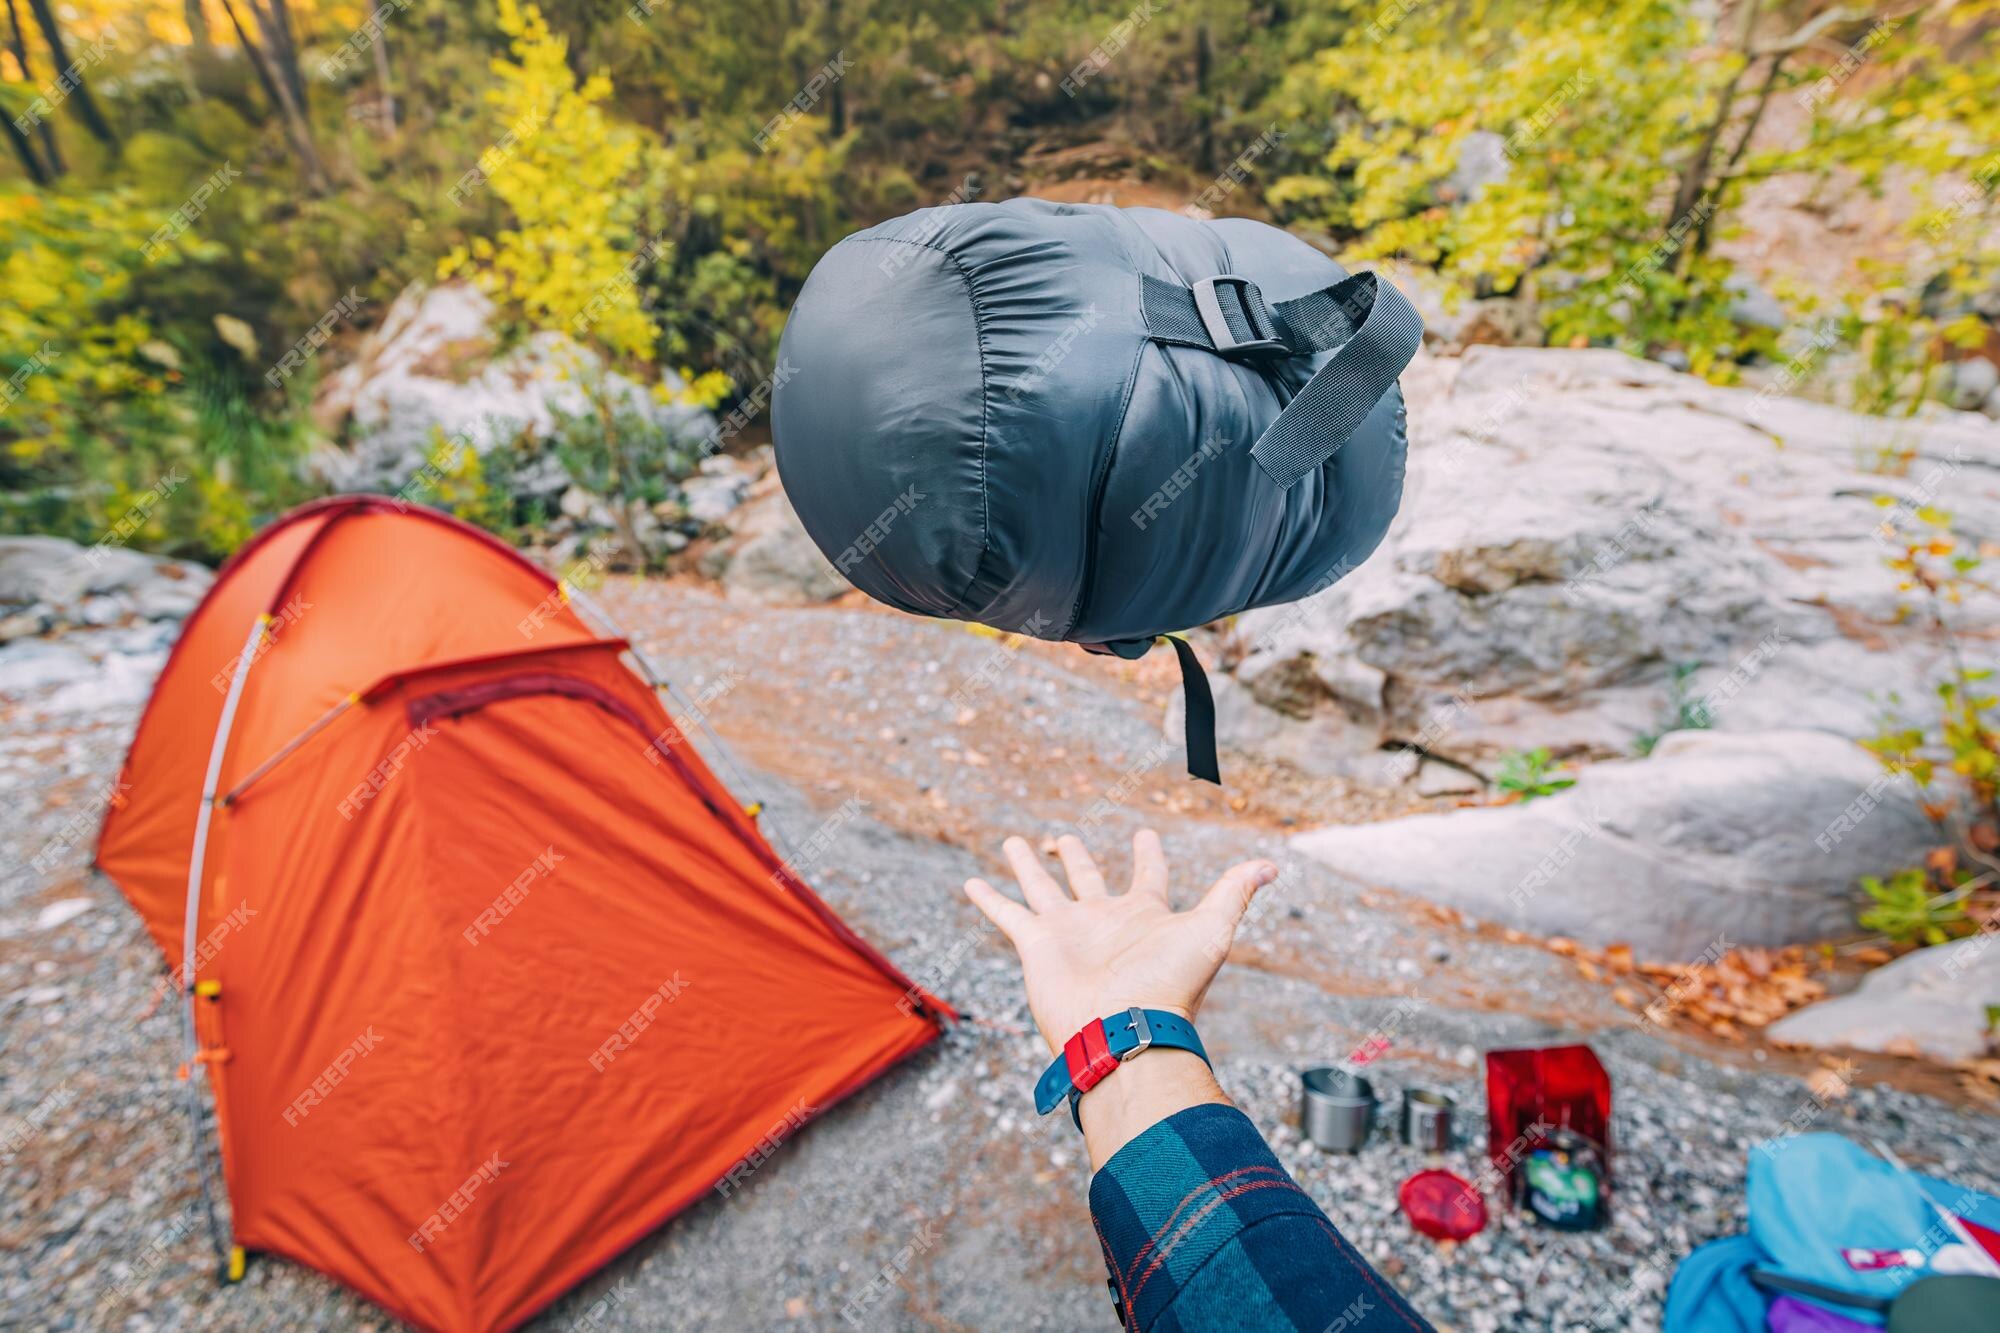 Collapsible camping tent, sleeping bags, and cooking gear arranged around a campfire in a forest setting.